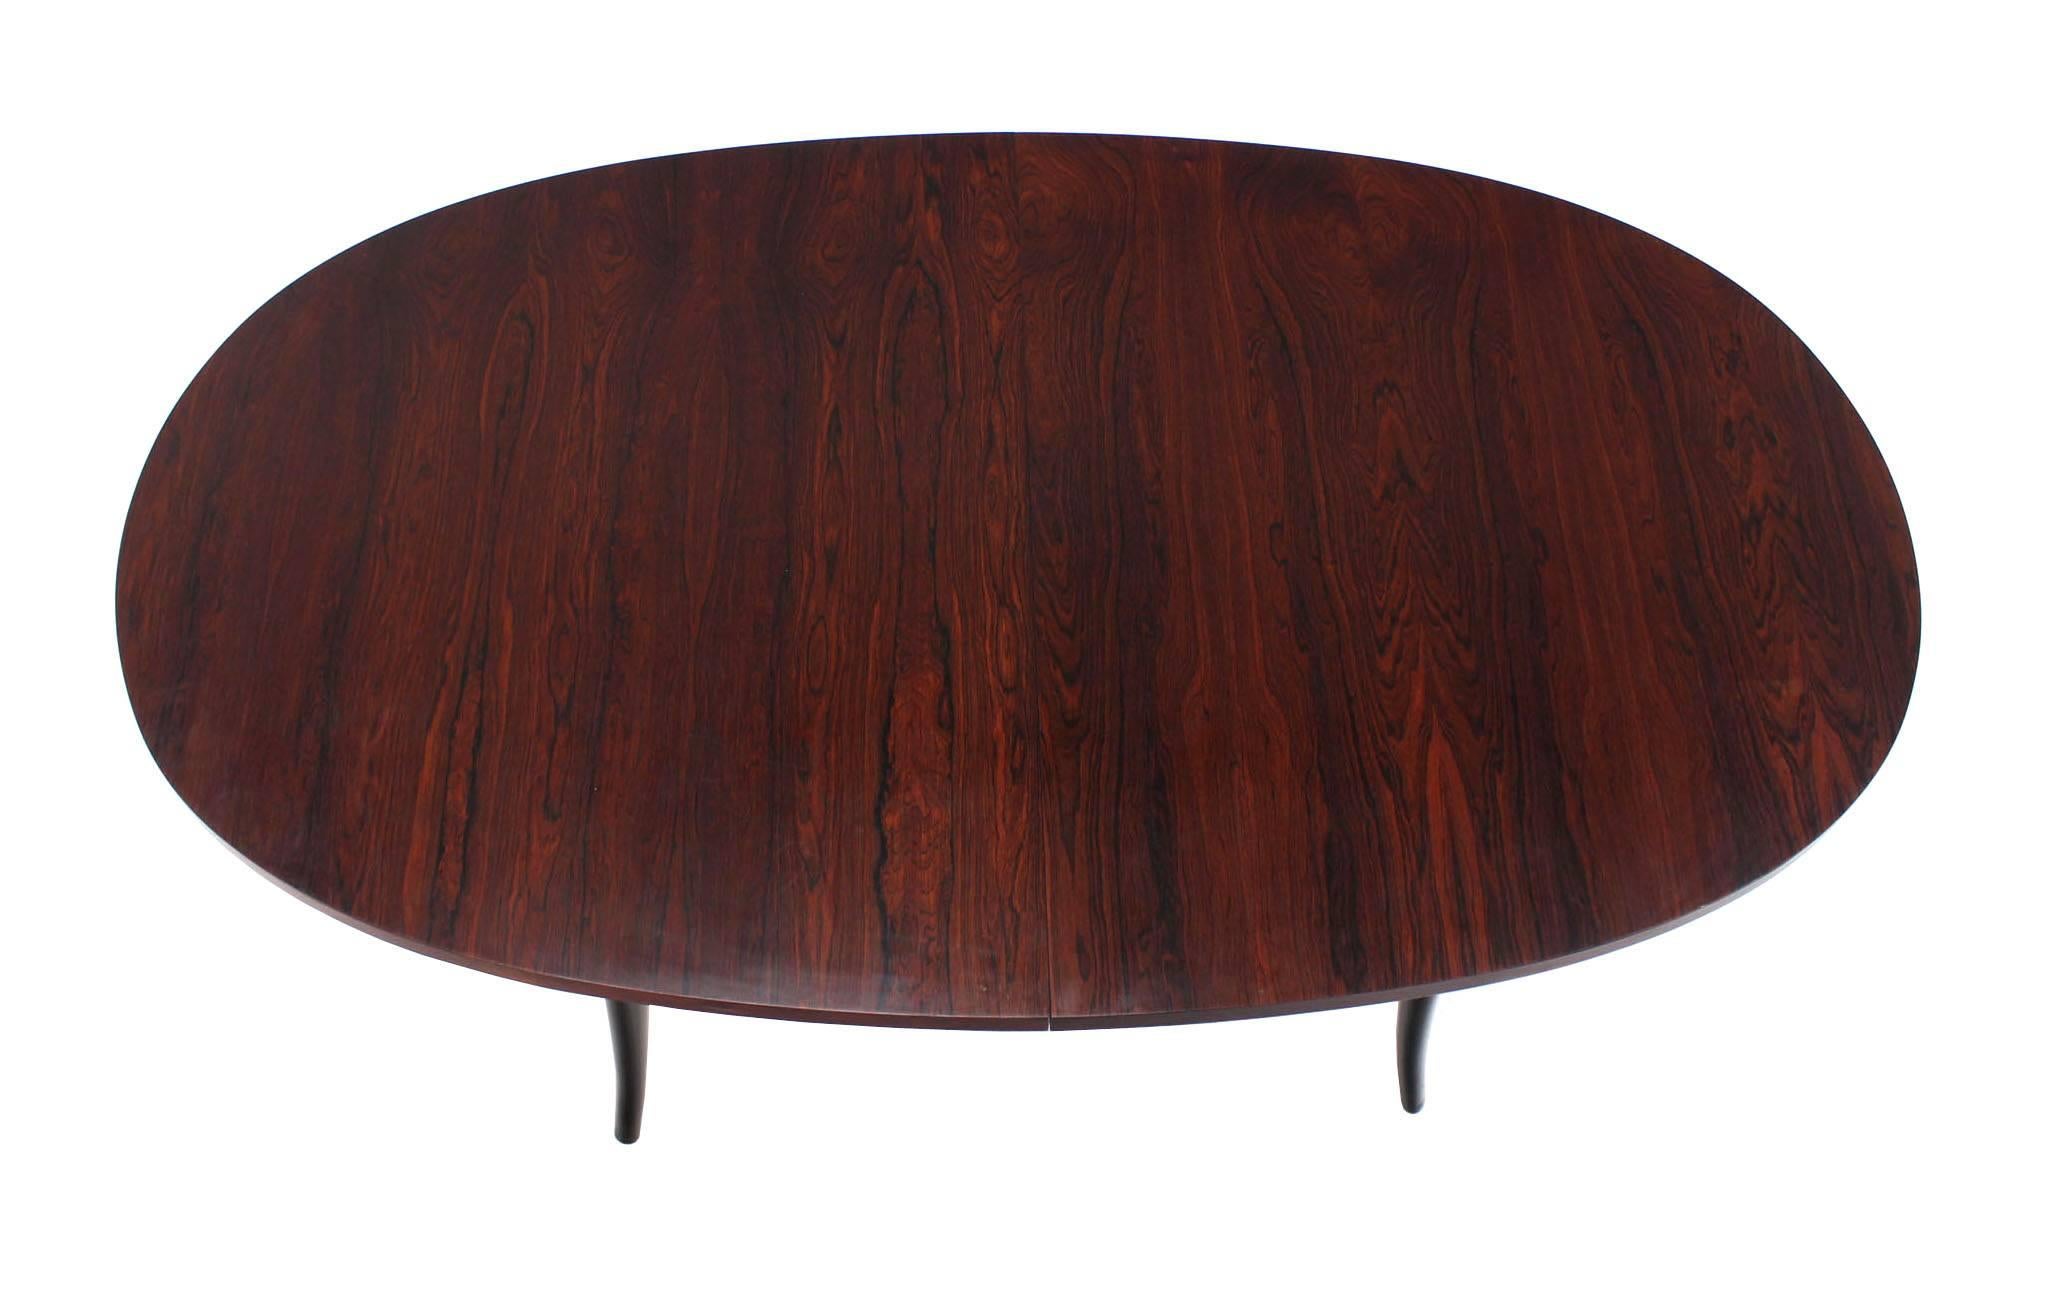 Ebonized Oval Rosewood Dining Table on Tapered Horn-Shaped Legs Harvey Probber